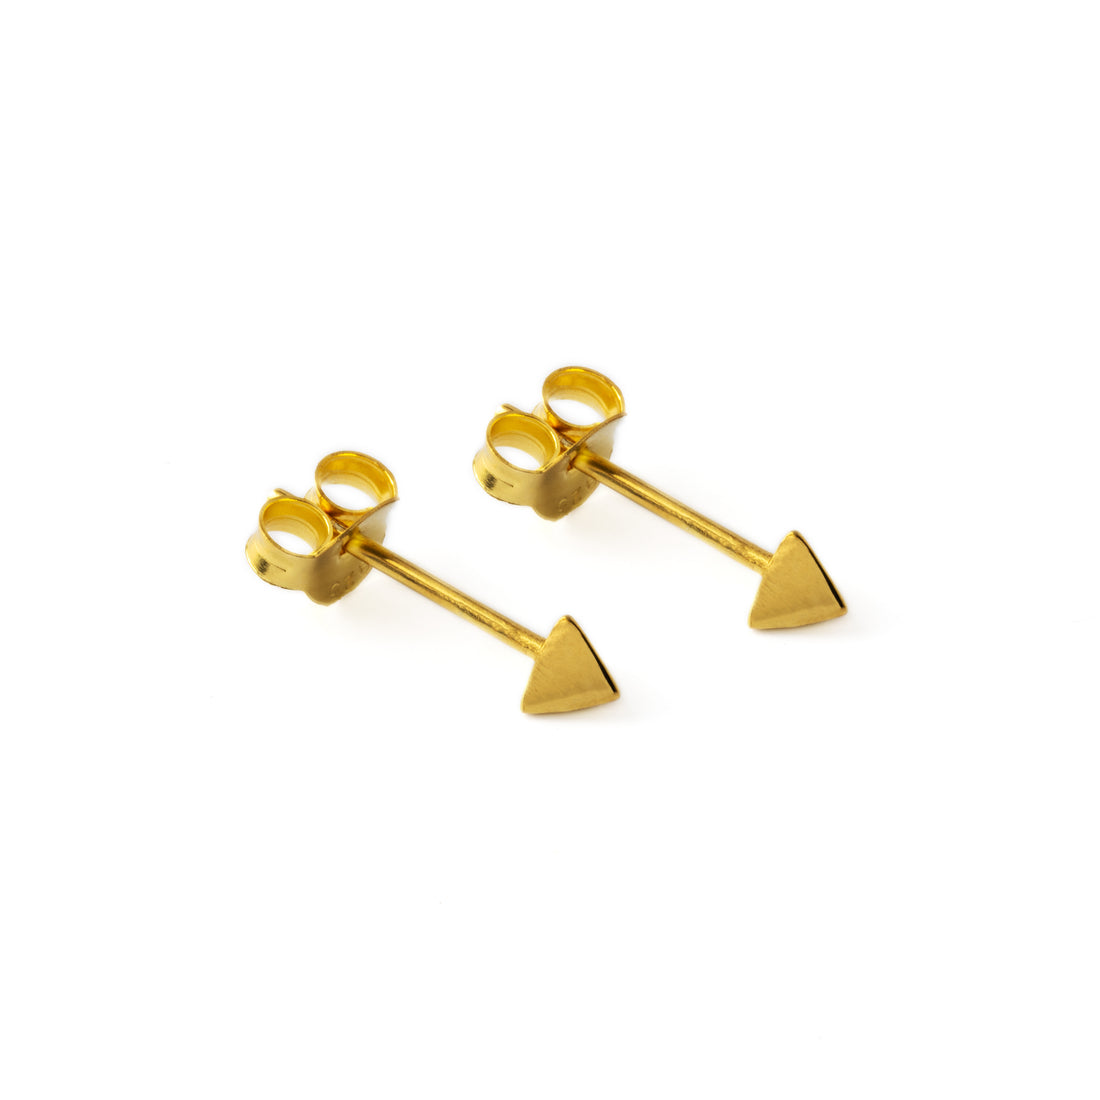 pair of gold tiny pyramid ear studs right side view